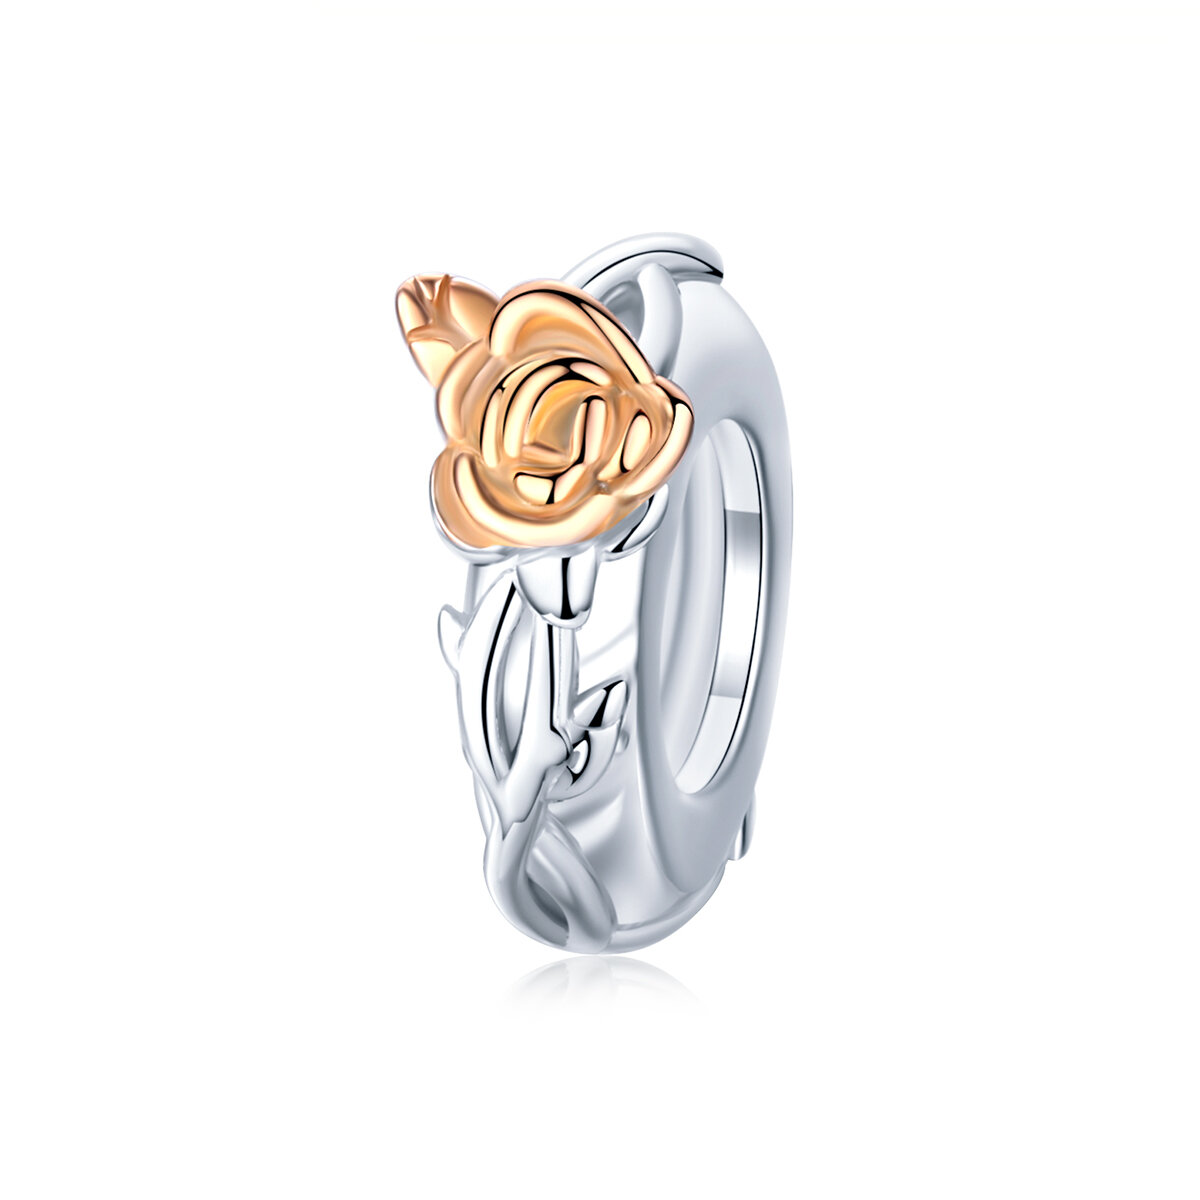 GemKing BSC146 the Rose S925 Sterling Silver Charm